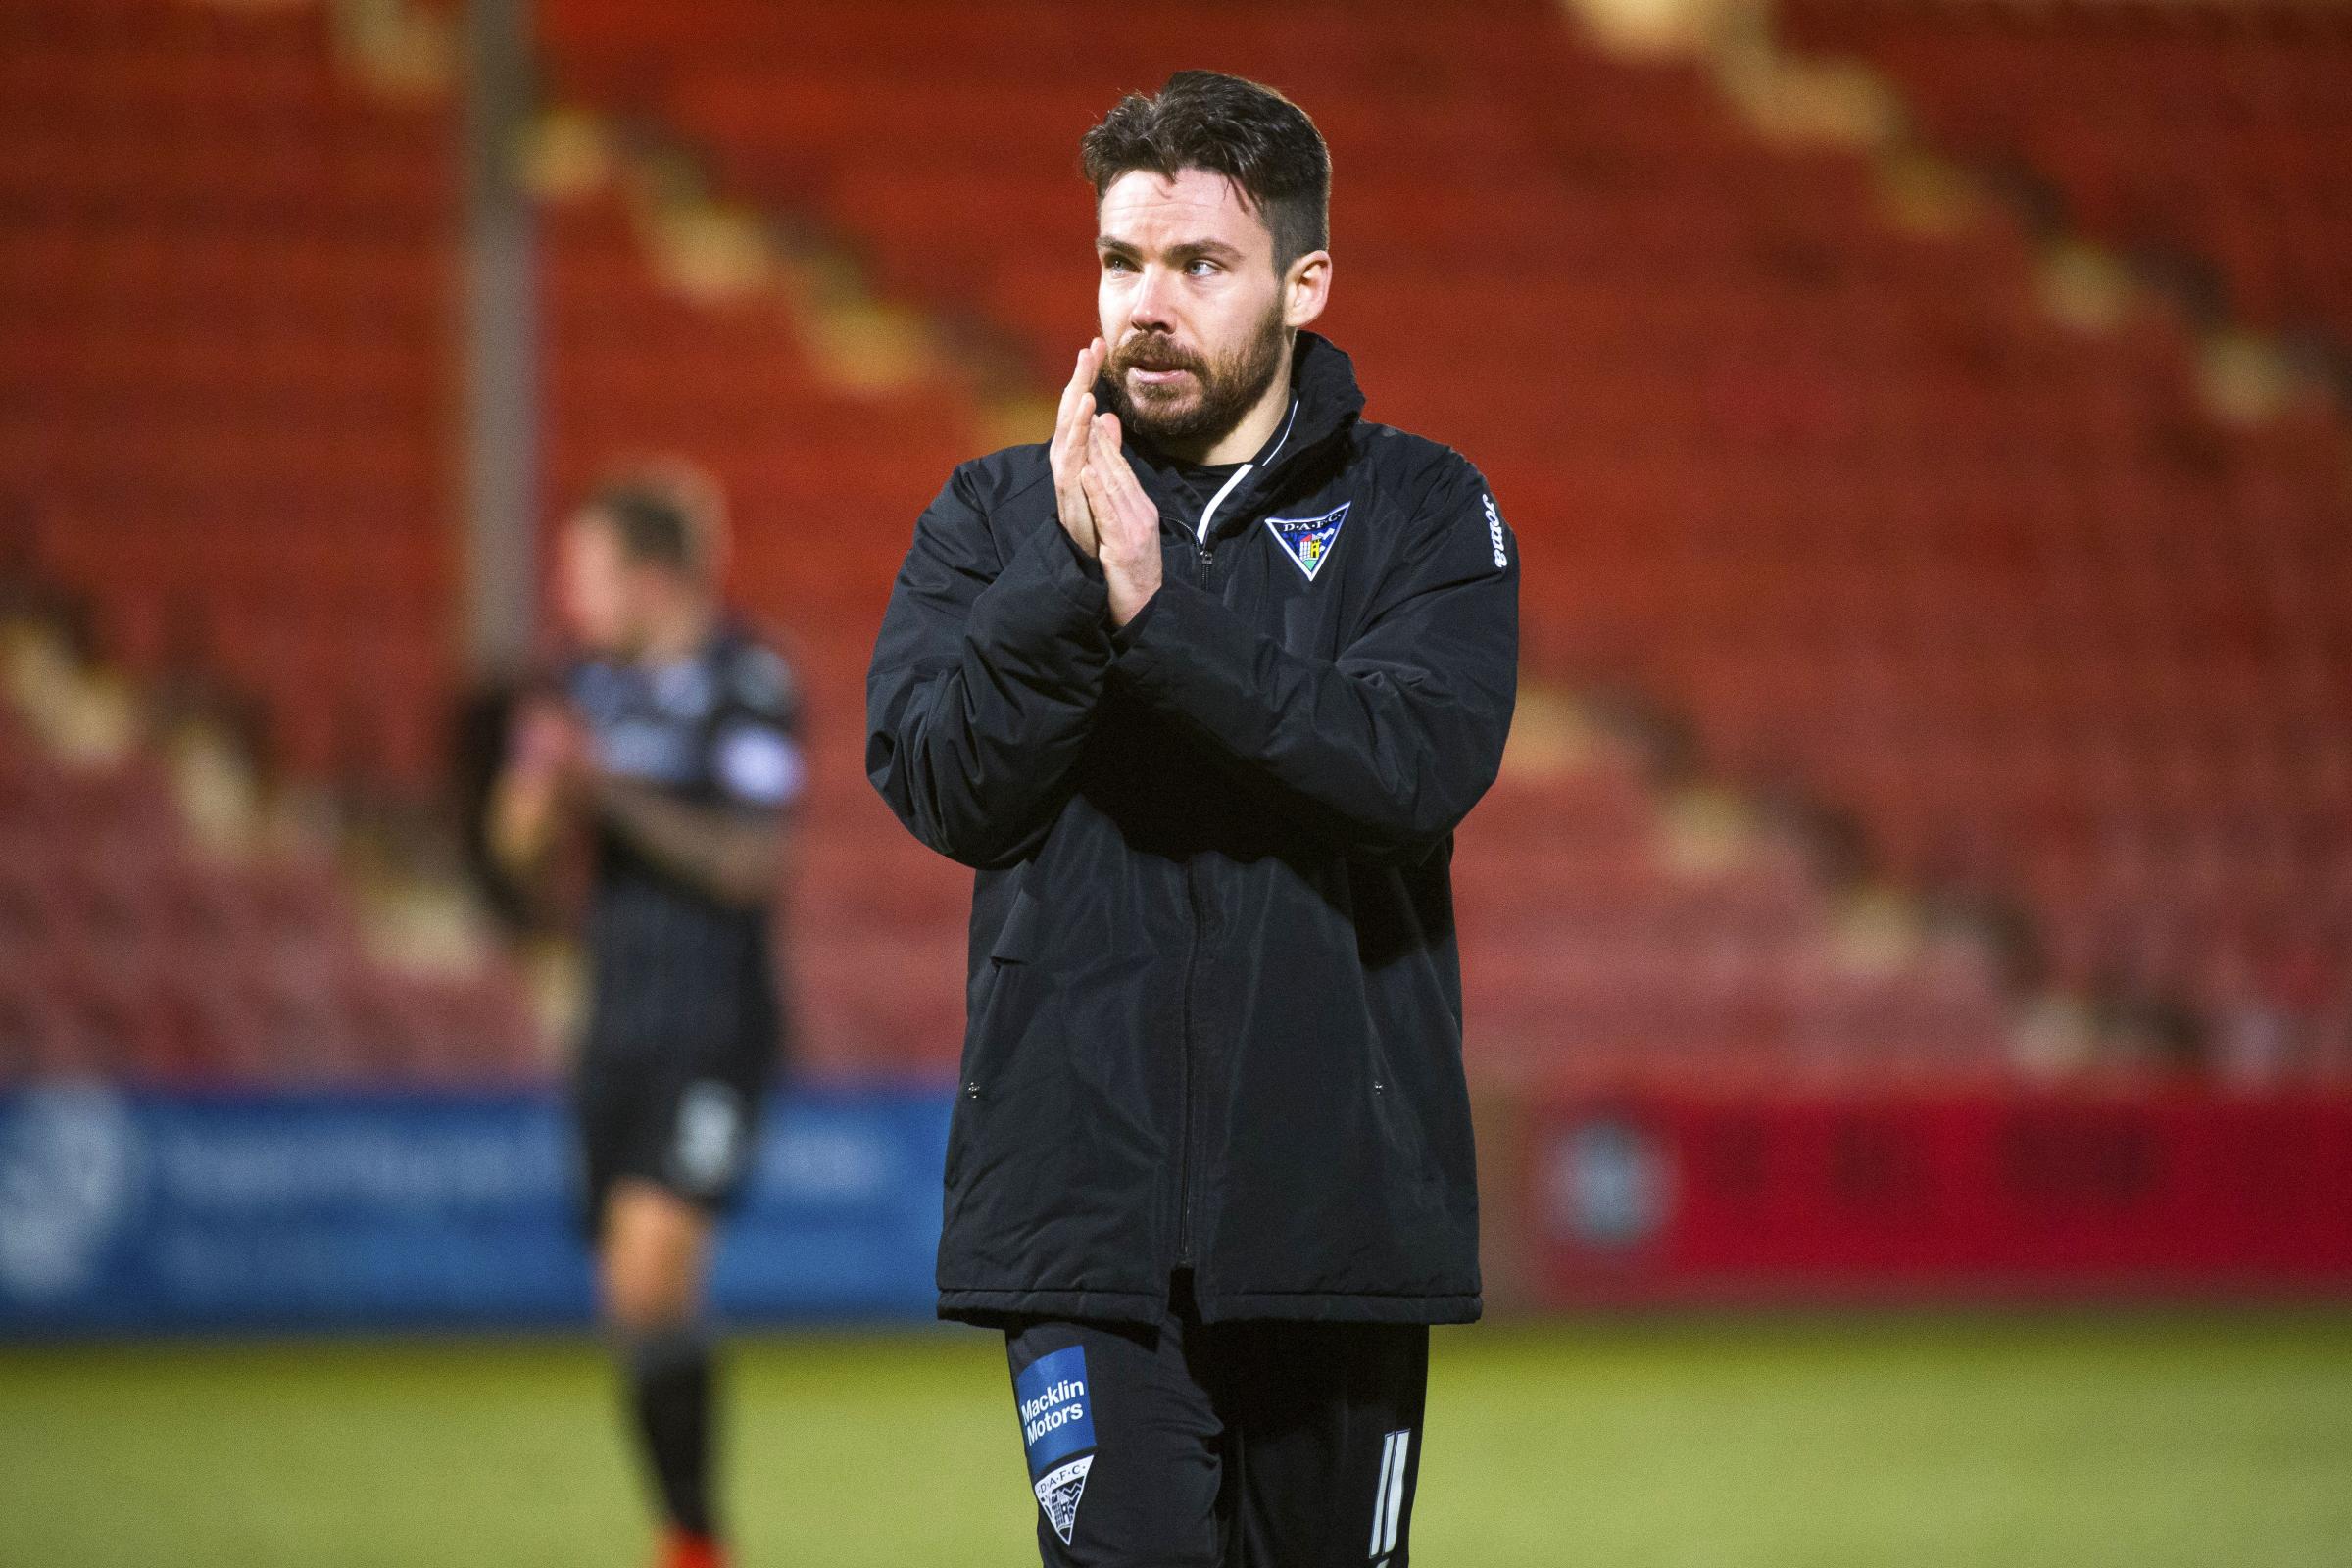 Ryan Dow: Dunfermline have to get the Ibrox crowd to turn on under-pressure Rangers